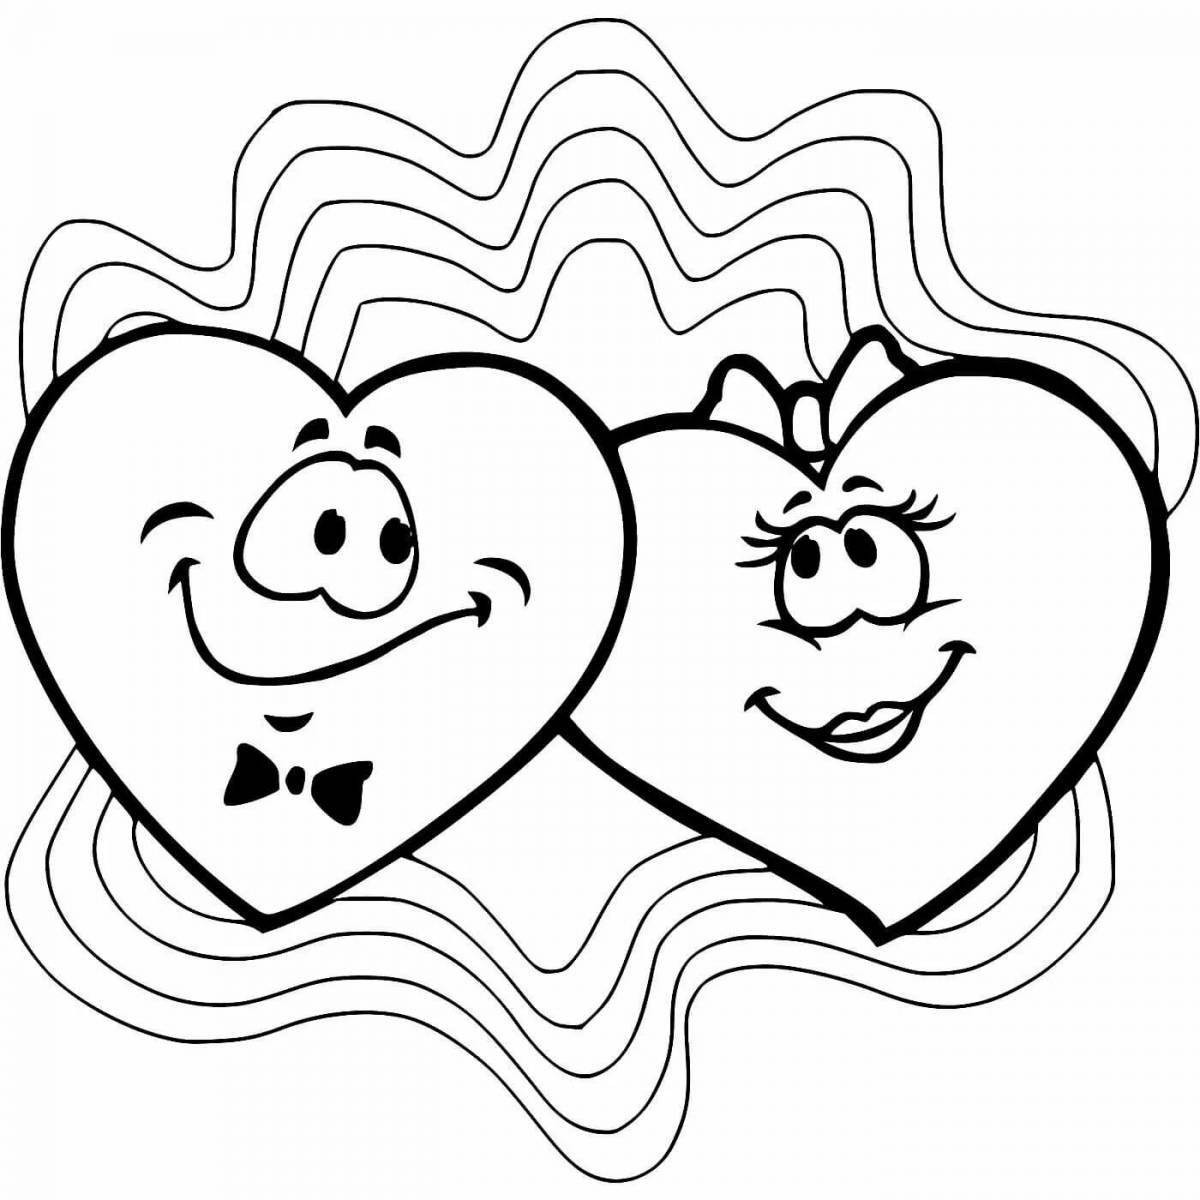 Fancy valentine coloring book for valentine's day for kids